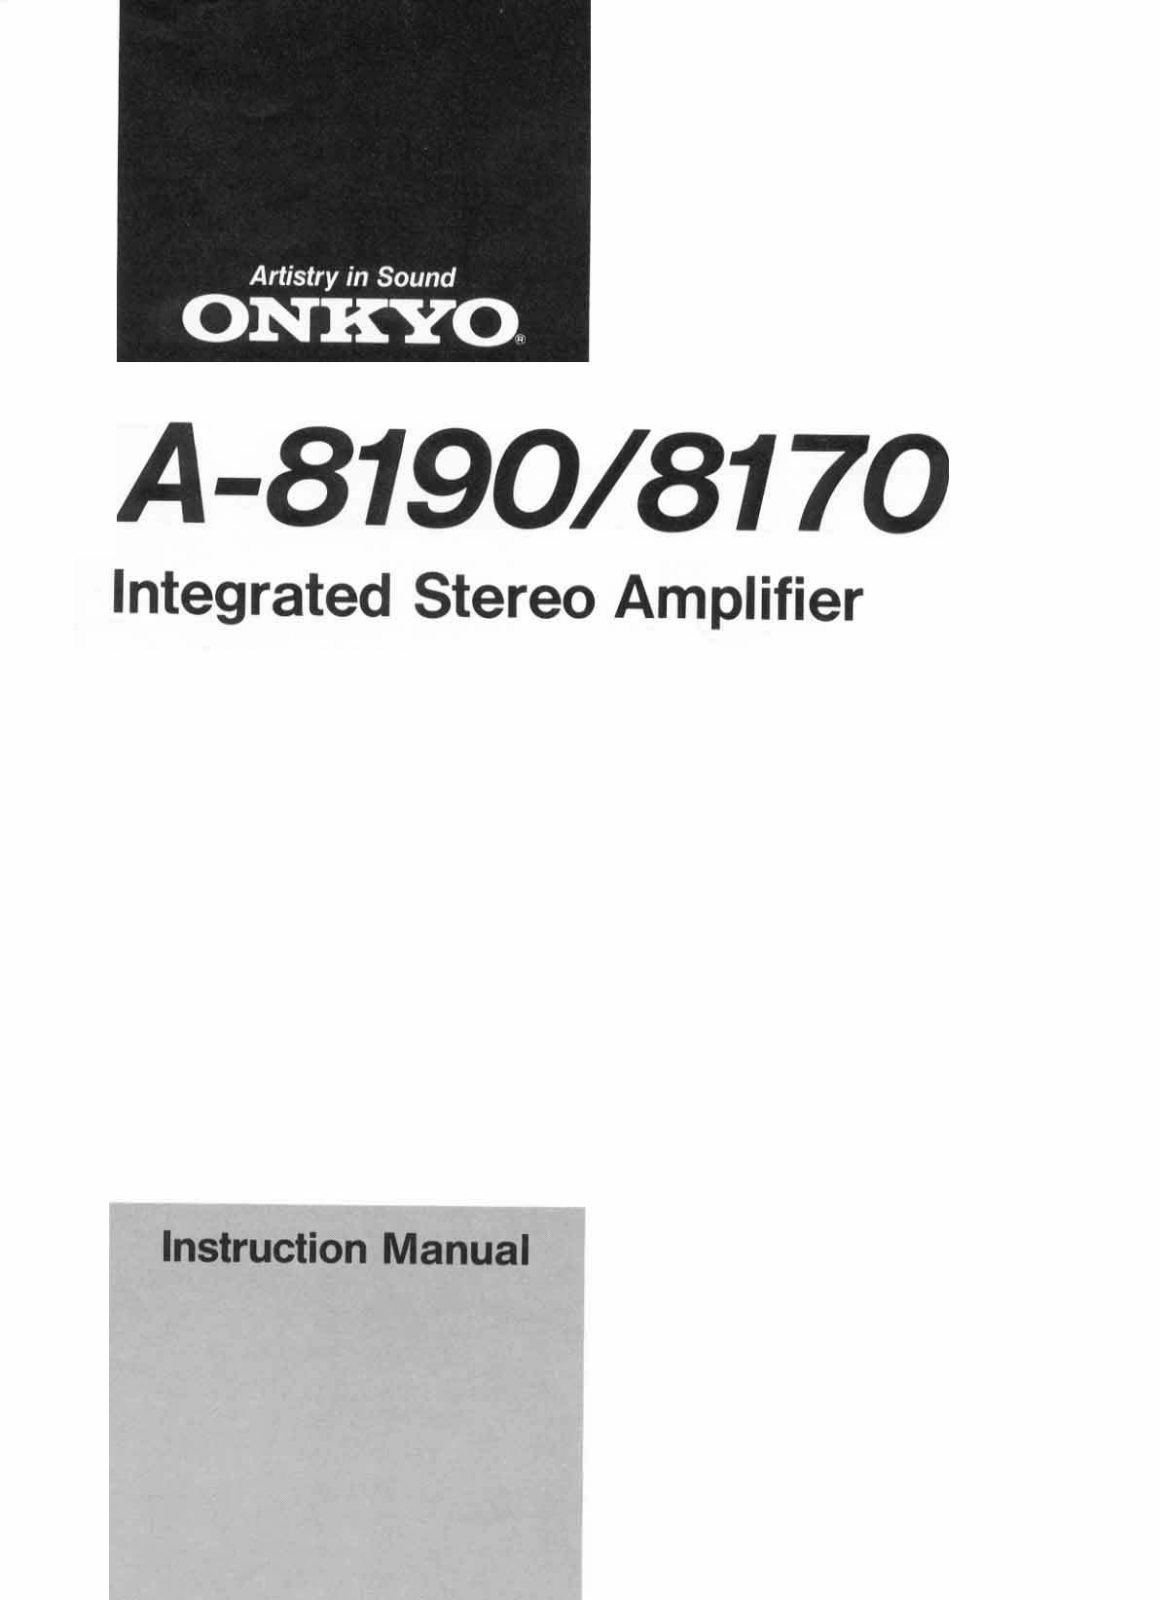 Onkyo A-8190, A-8170 Owners Manual